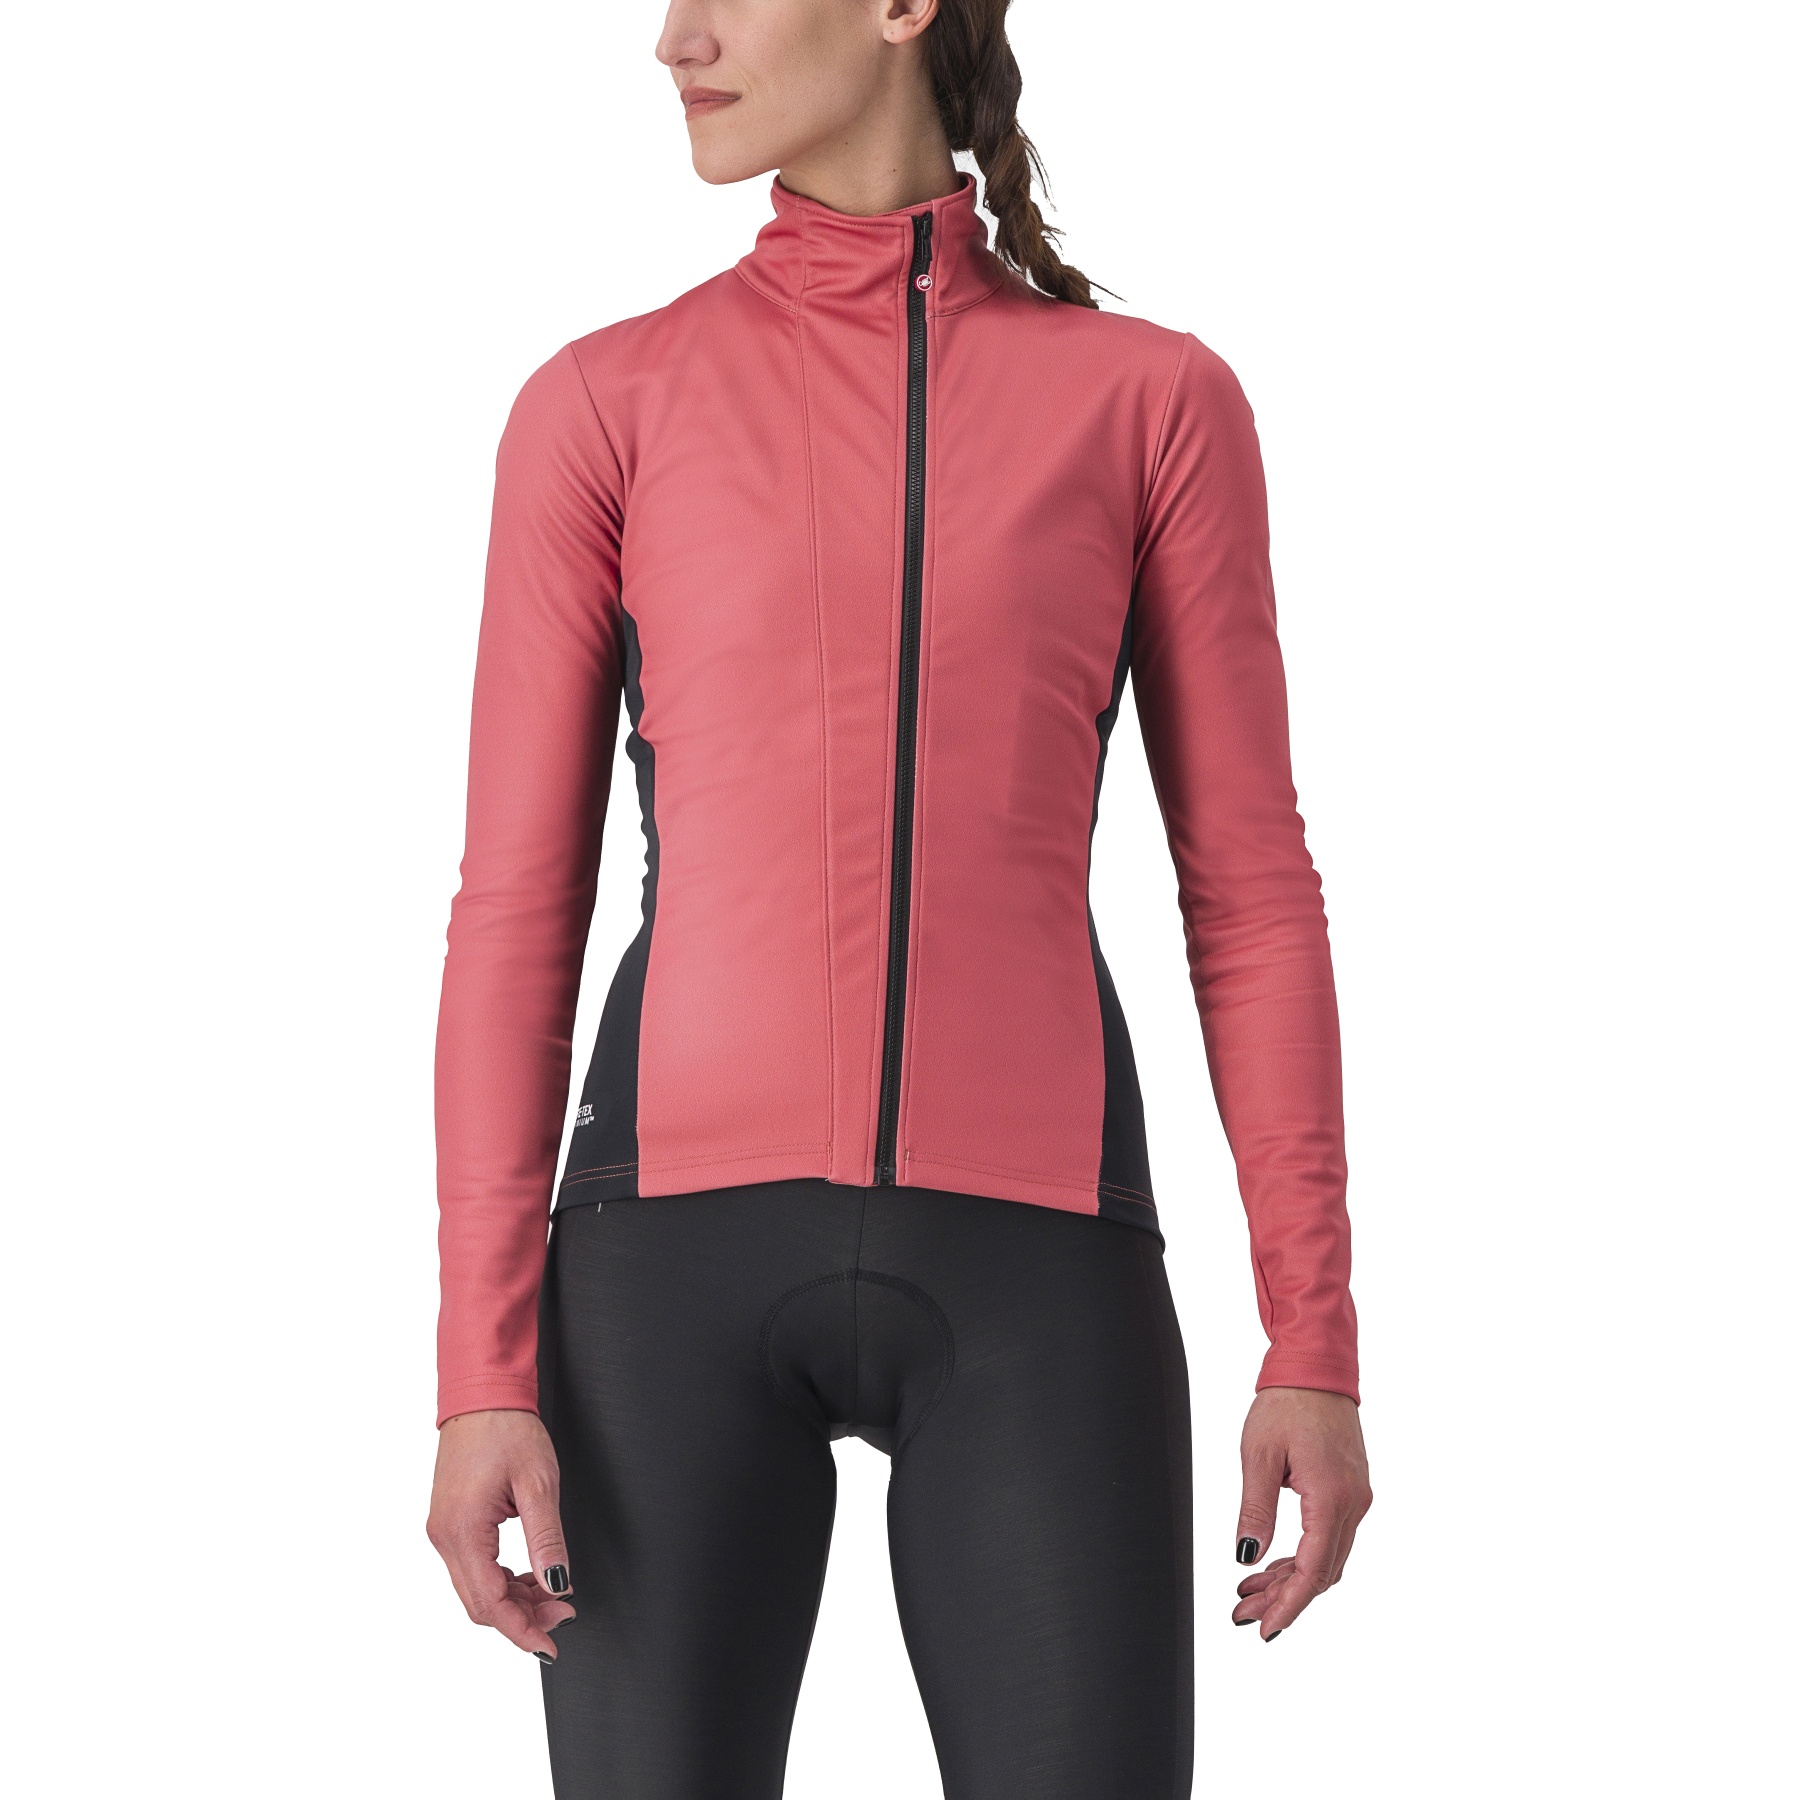 Picture of Castelli Transition 2 Jacket Women - mineral red/black 654